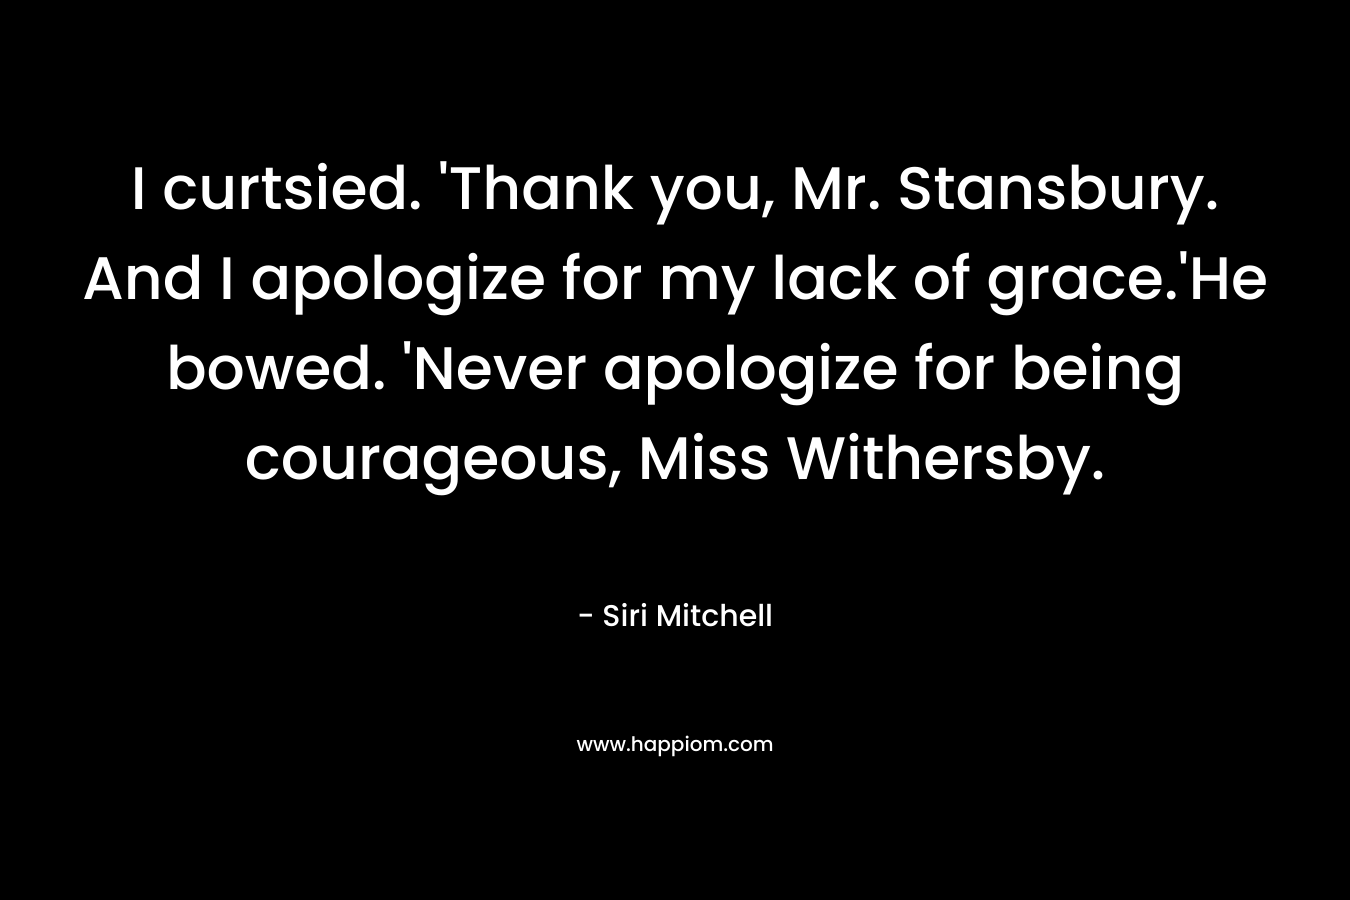 I curtsied. 'Thank you, Mr. Stansbury. And I apologize for my lack of grace.'He bowed. 'Never apologize for being courageous, Miss Withersby.